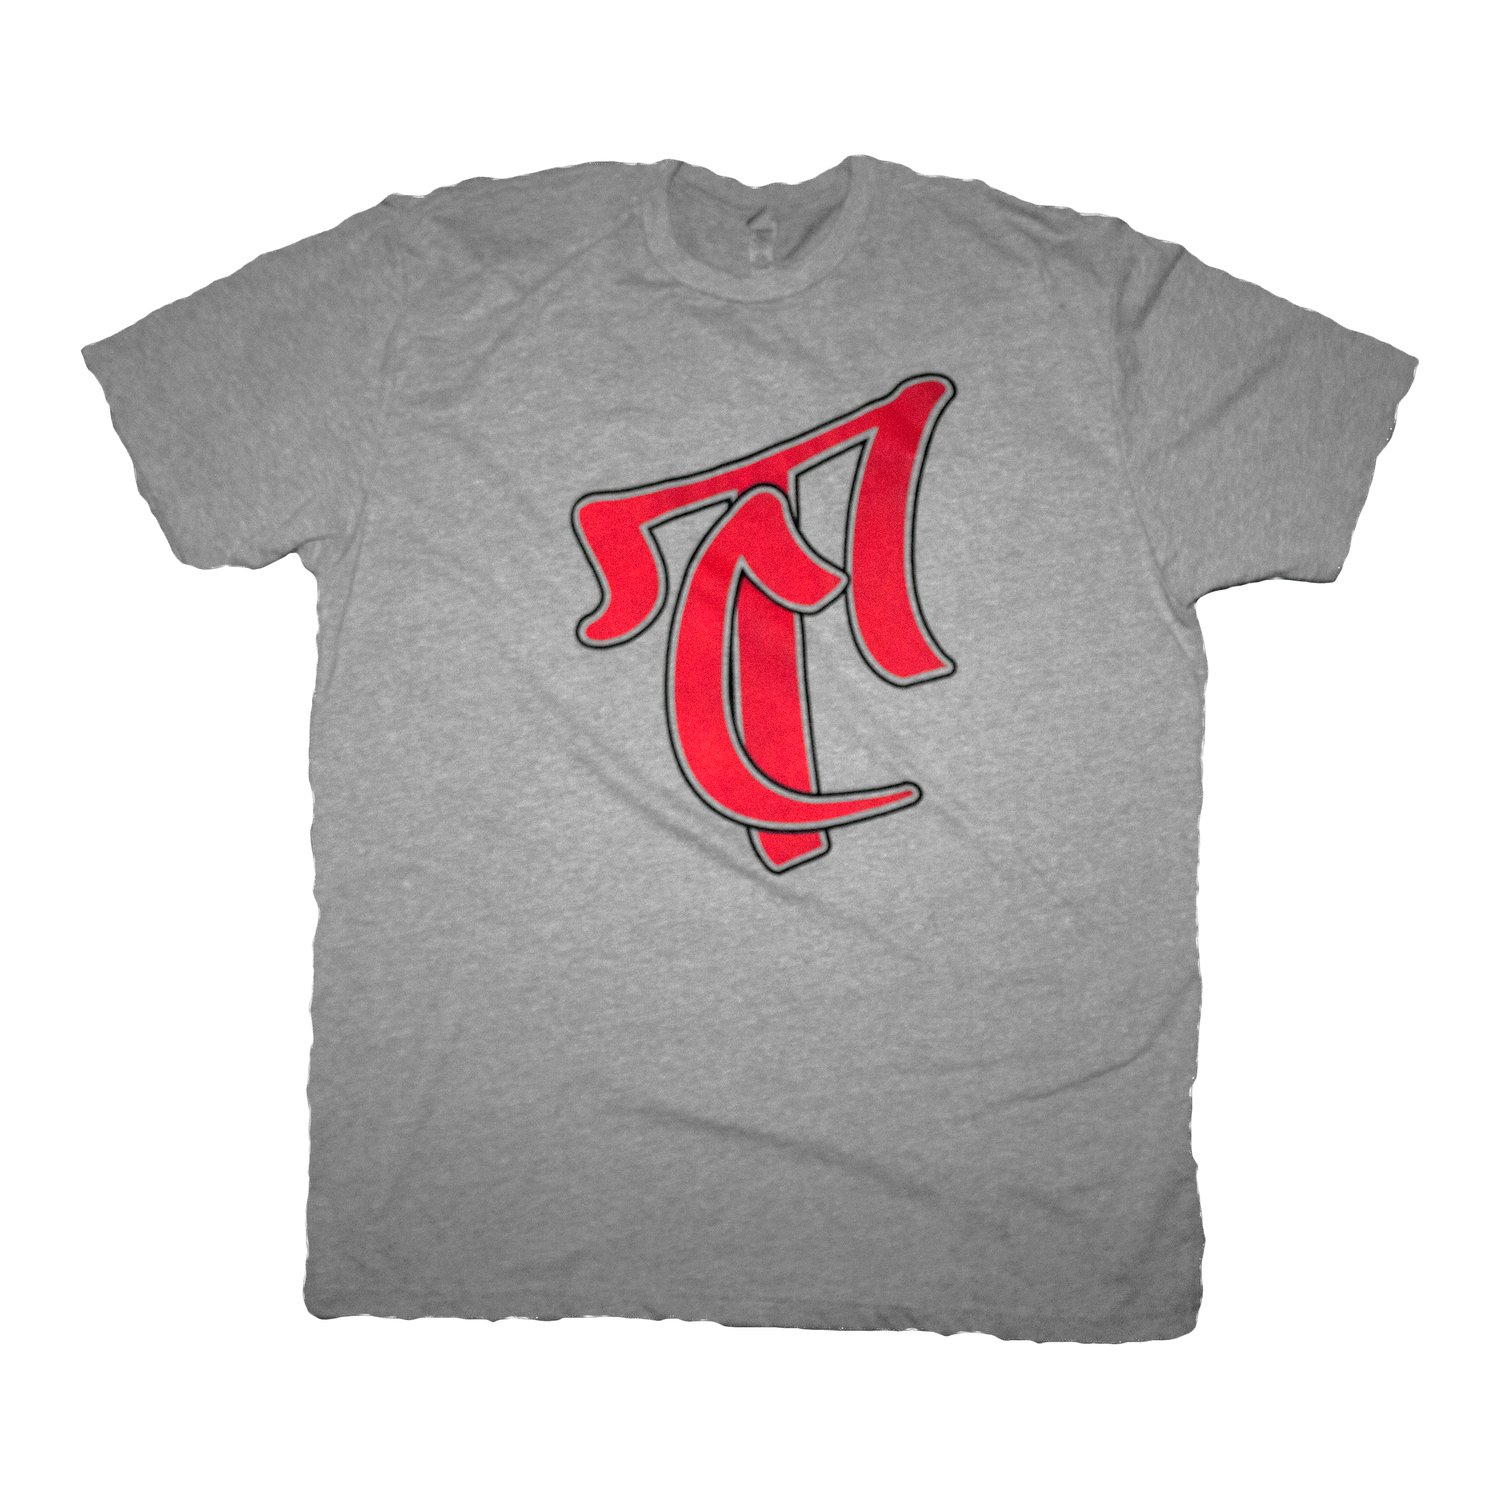 Image of The TC Logo Tee in Gray/Red